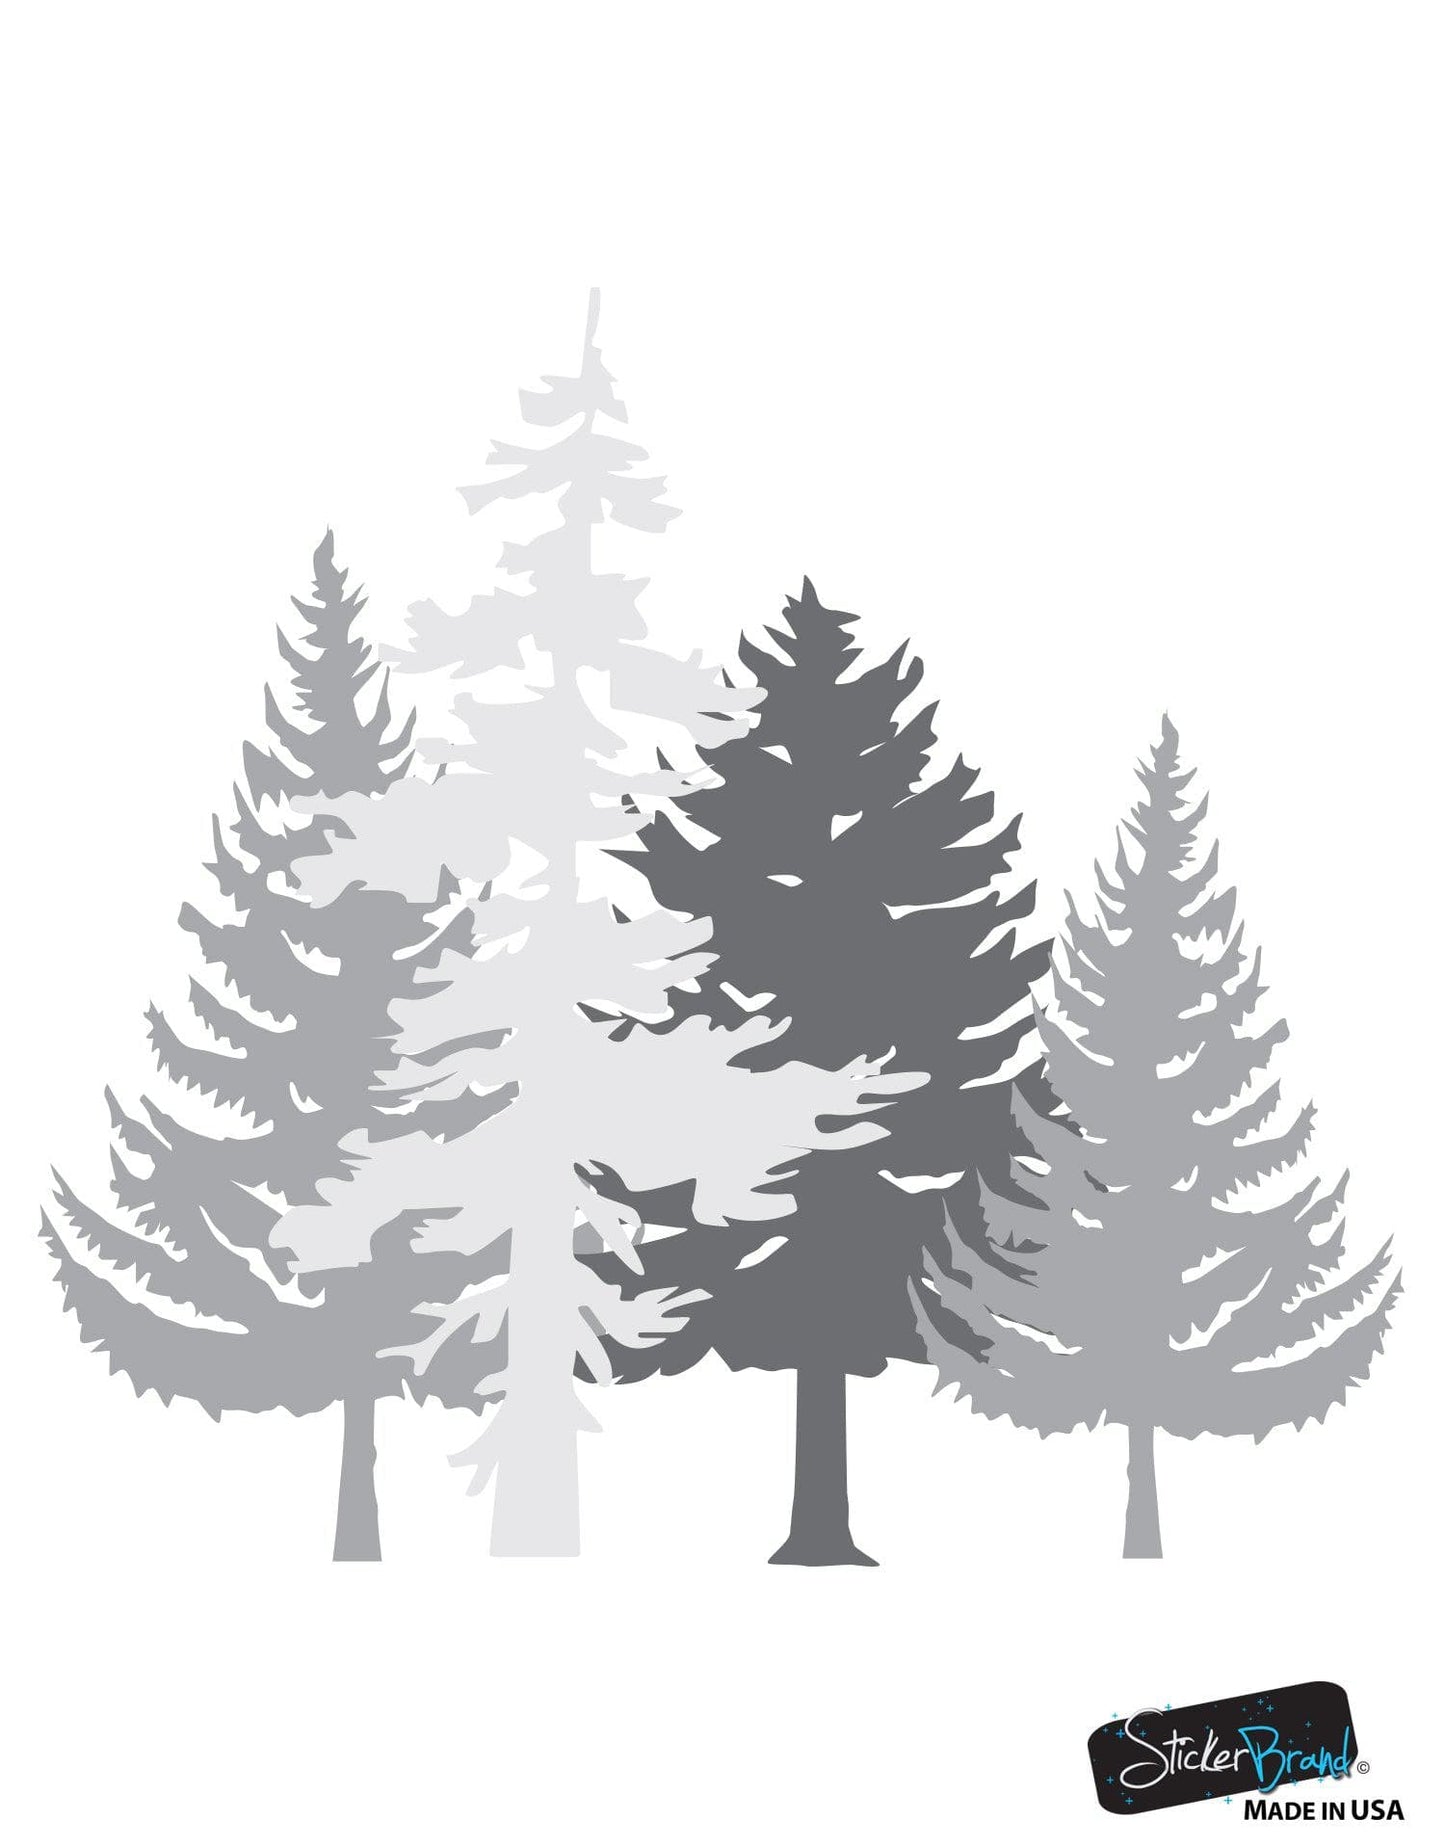 Cluster of 4 Winter Forest Trees Wall Decal Sticker. Grey Color Trees. Nursery Room Wall Decor. #6095